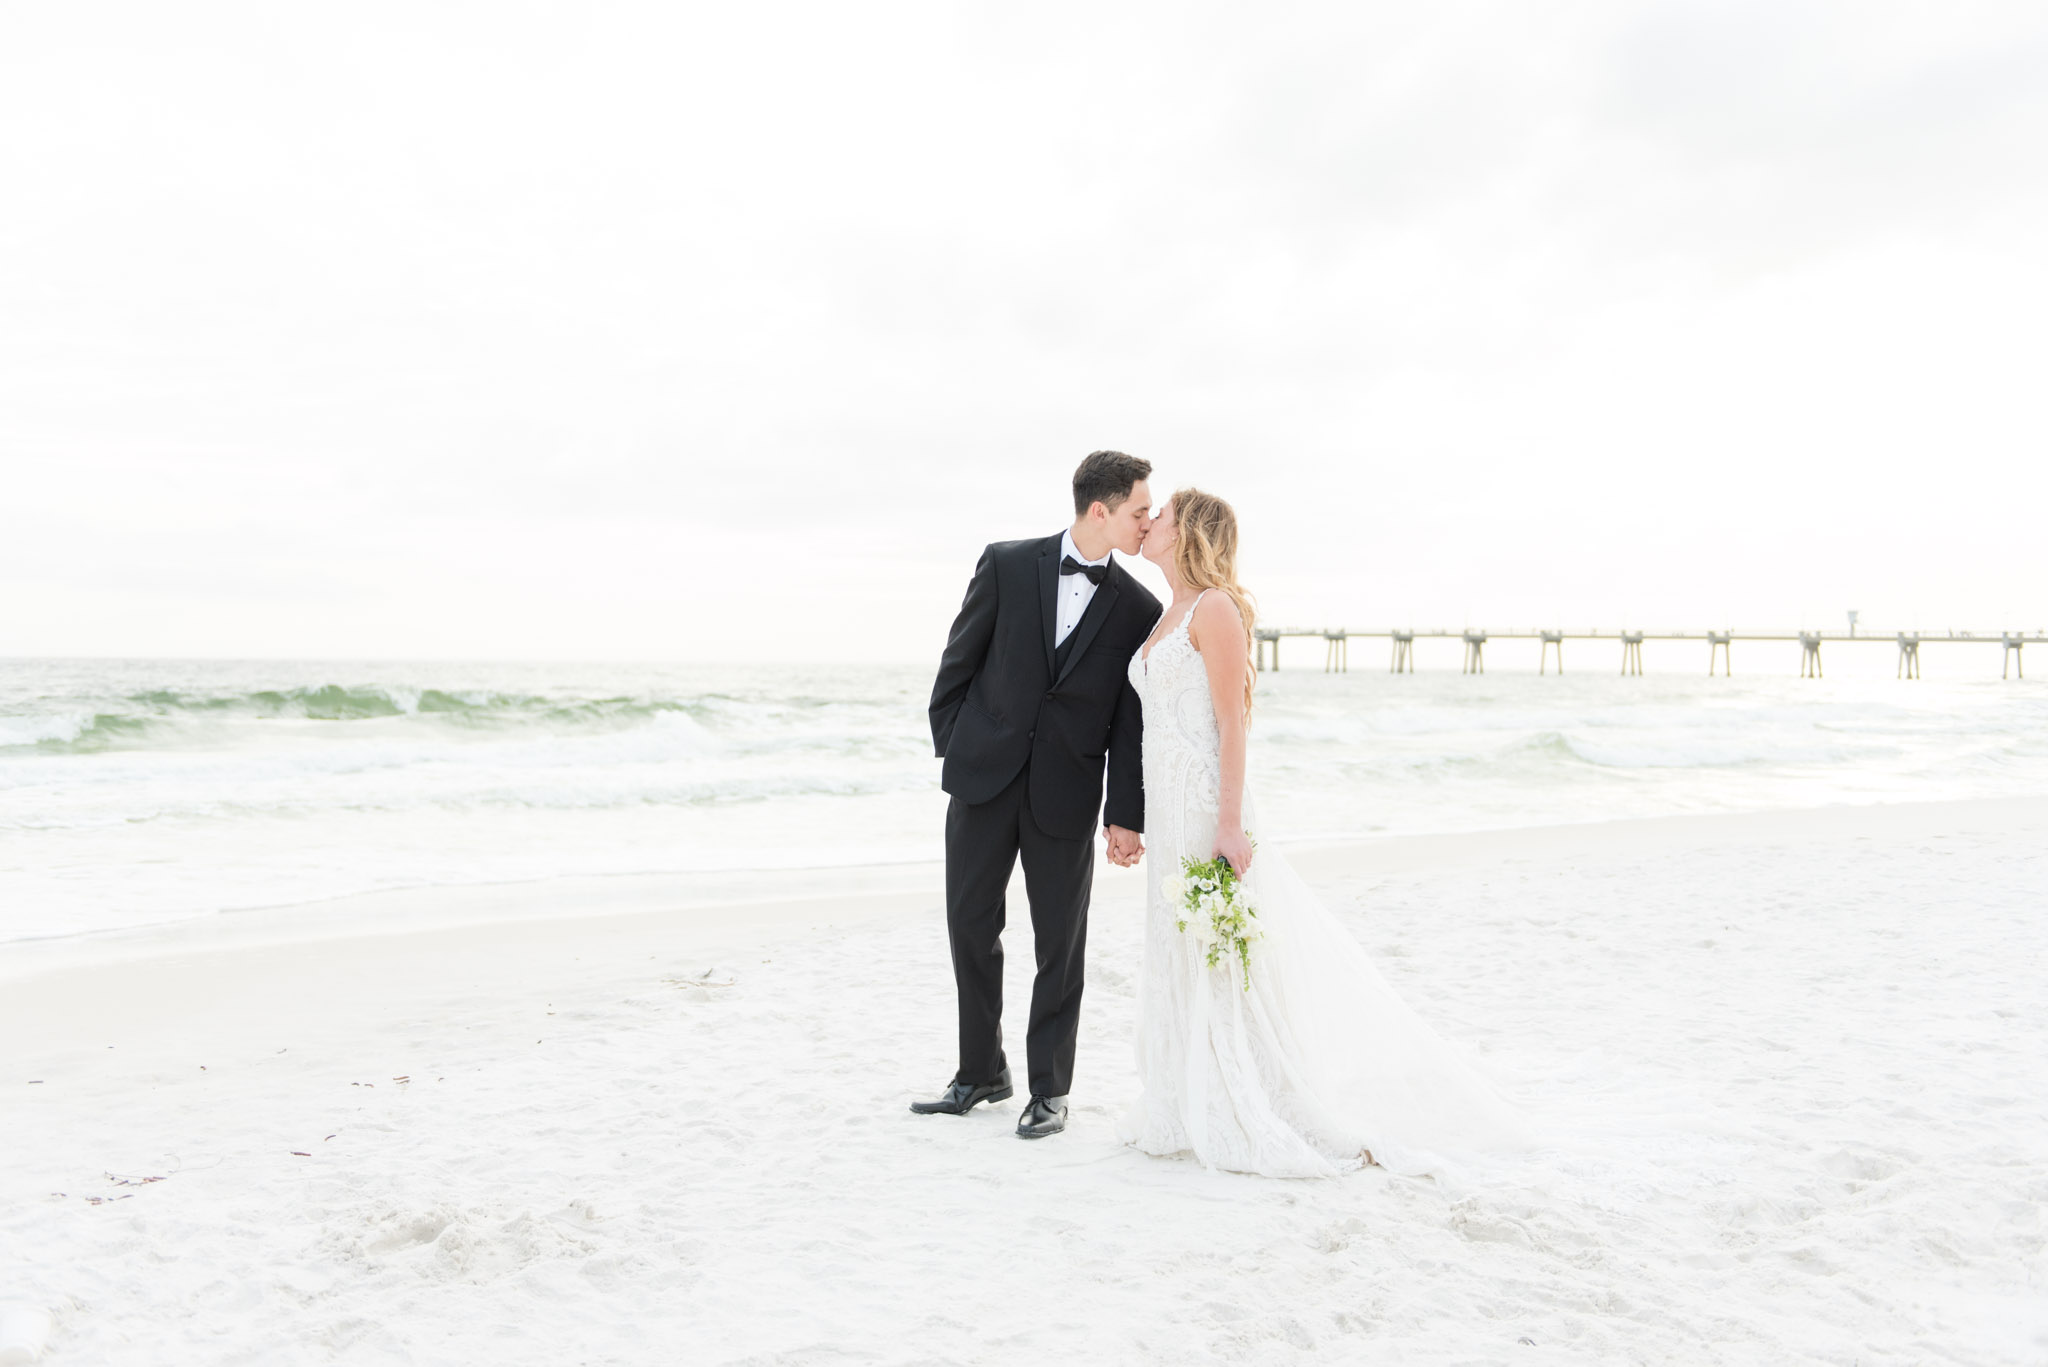 Bride and groom lean in for kiss on beach.